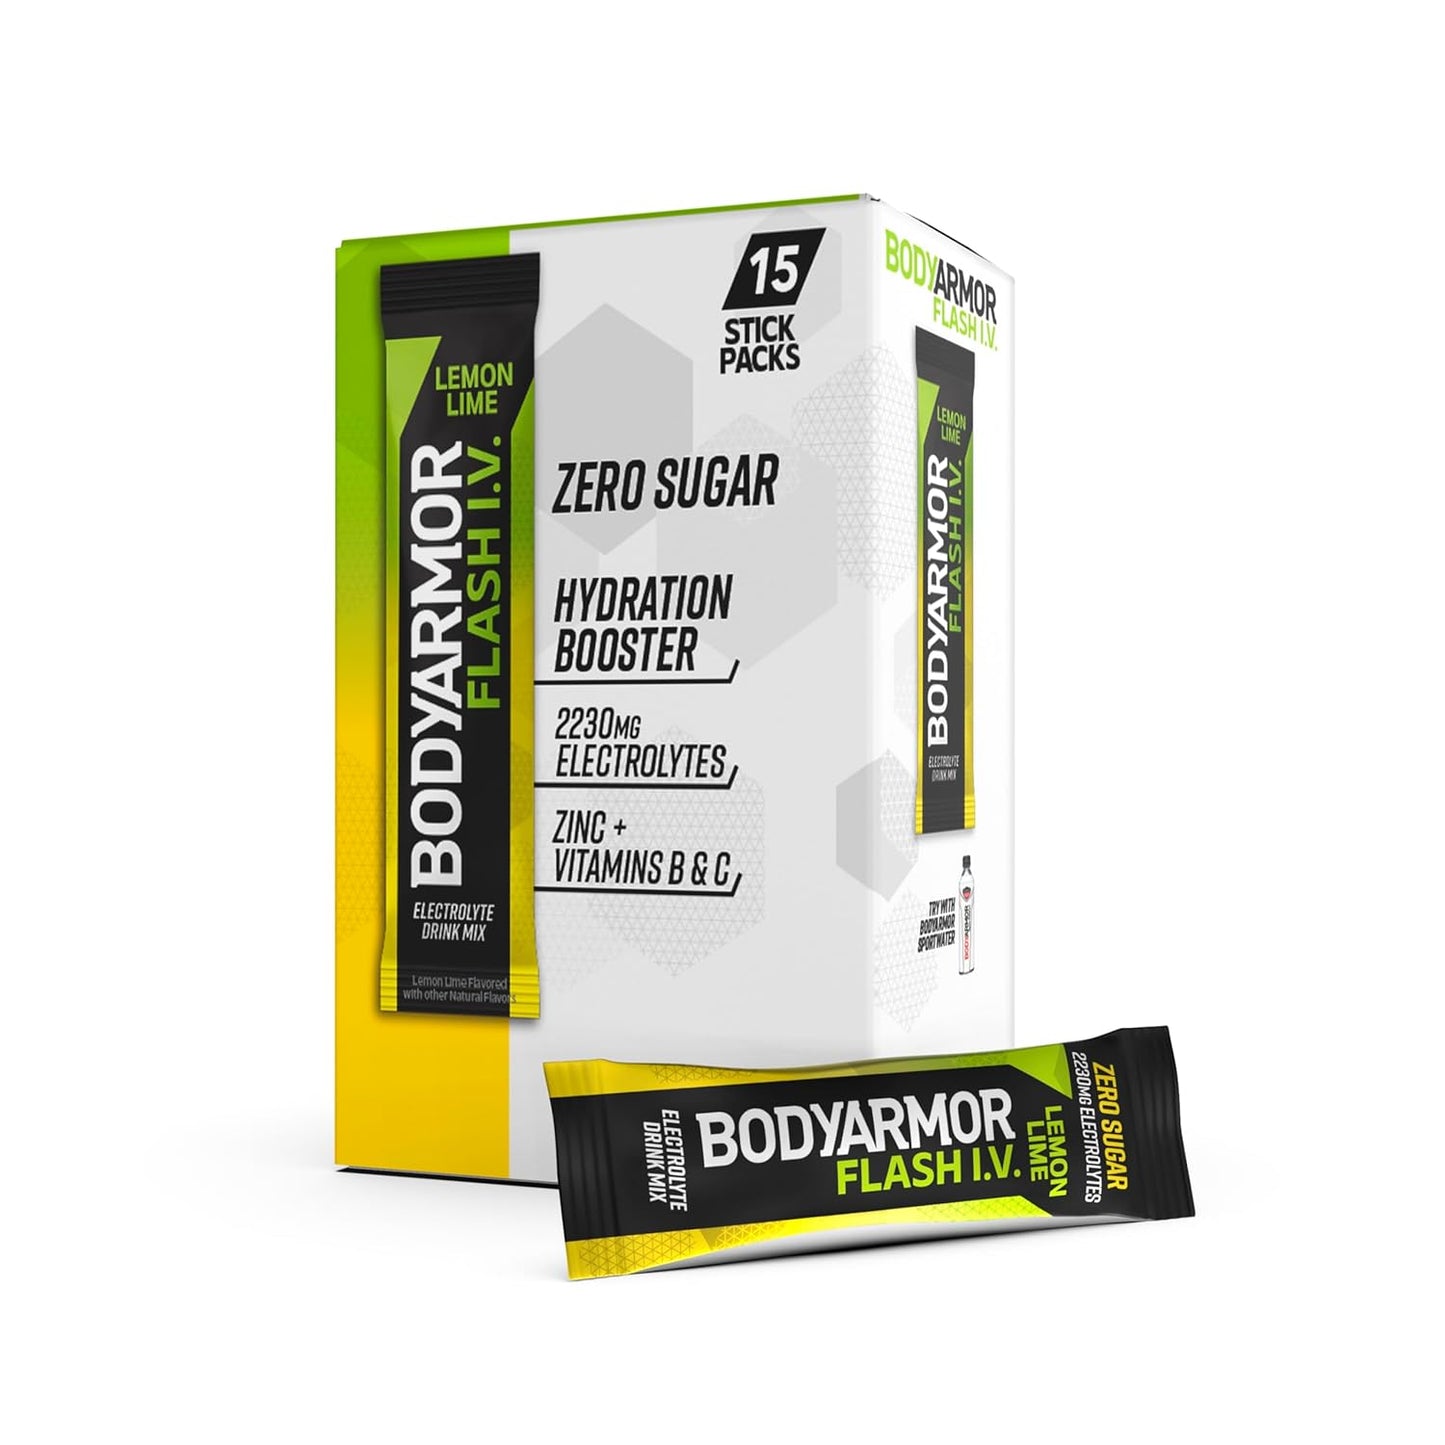 BODYARMOR Flash IV Electrolyte Packets, Zero Sugar Drink Mix, Single Serve Packs, Coconut Water Powder, Hydration for Workout, Travel Essentials, Just Add Sticks to Liquid (15 Count)